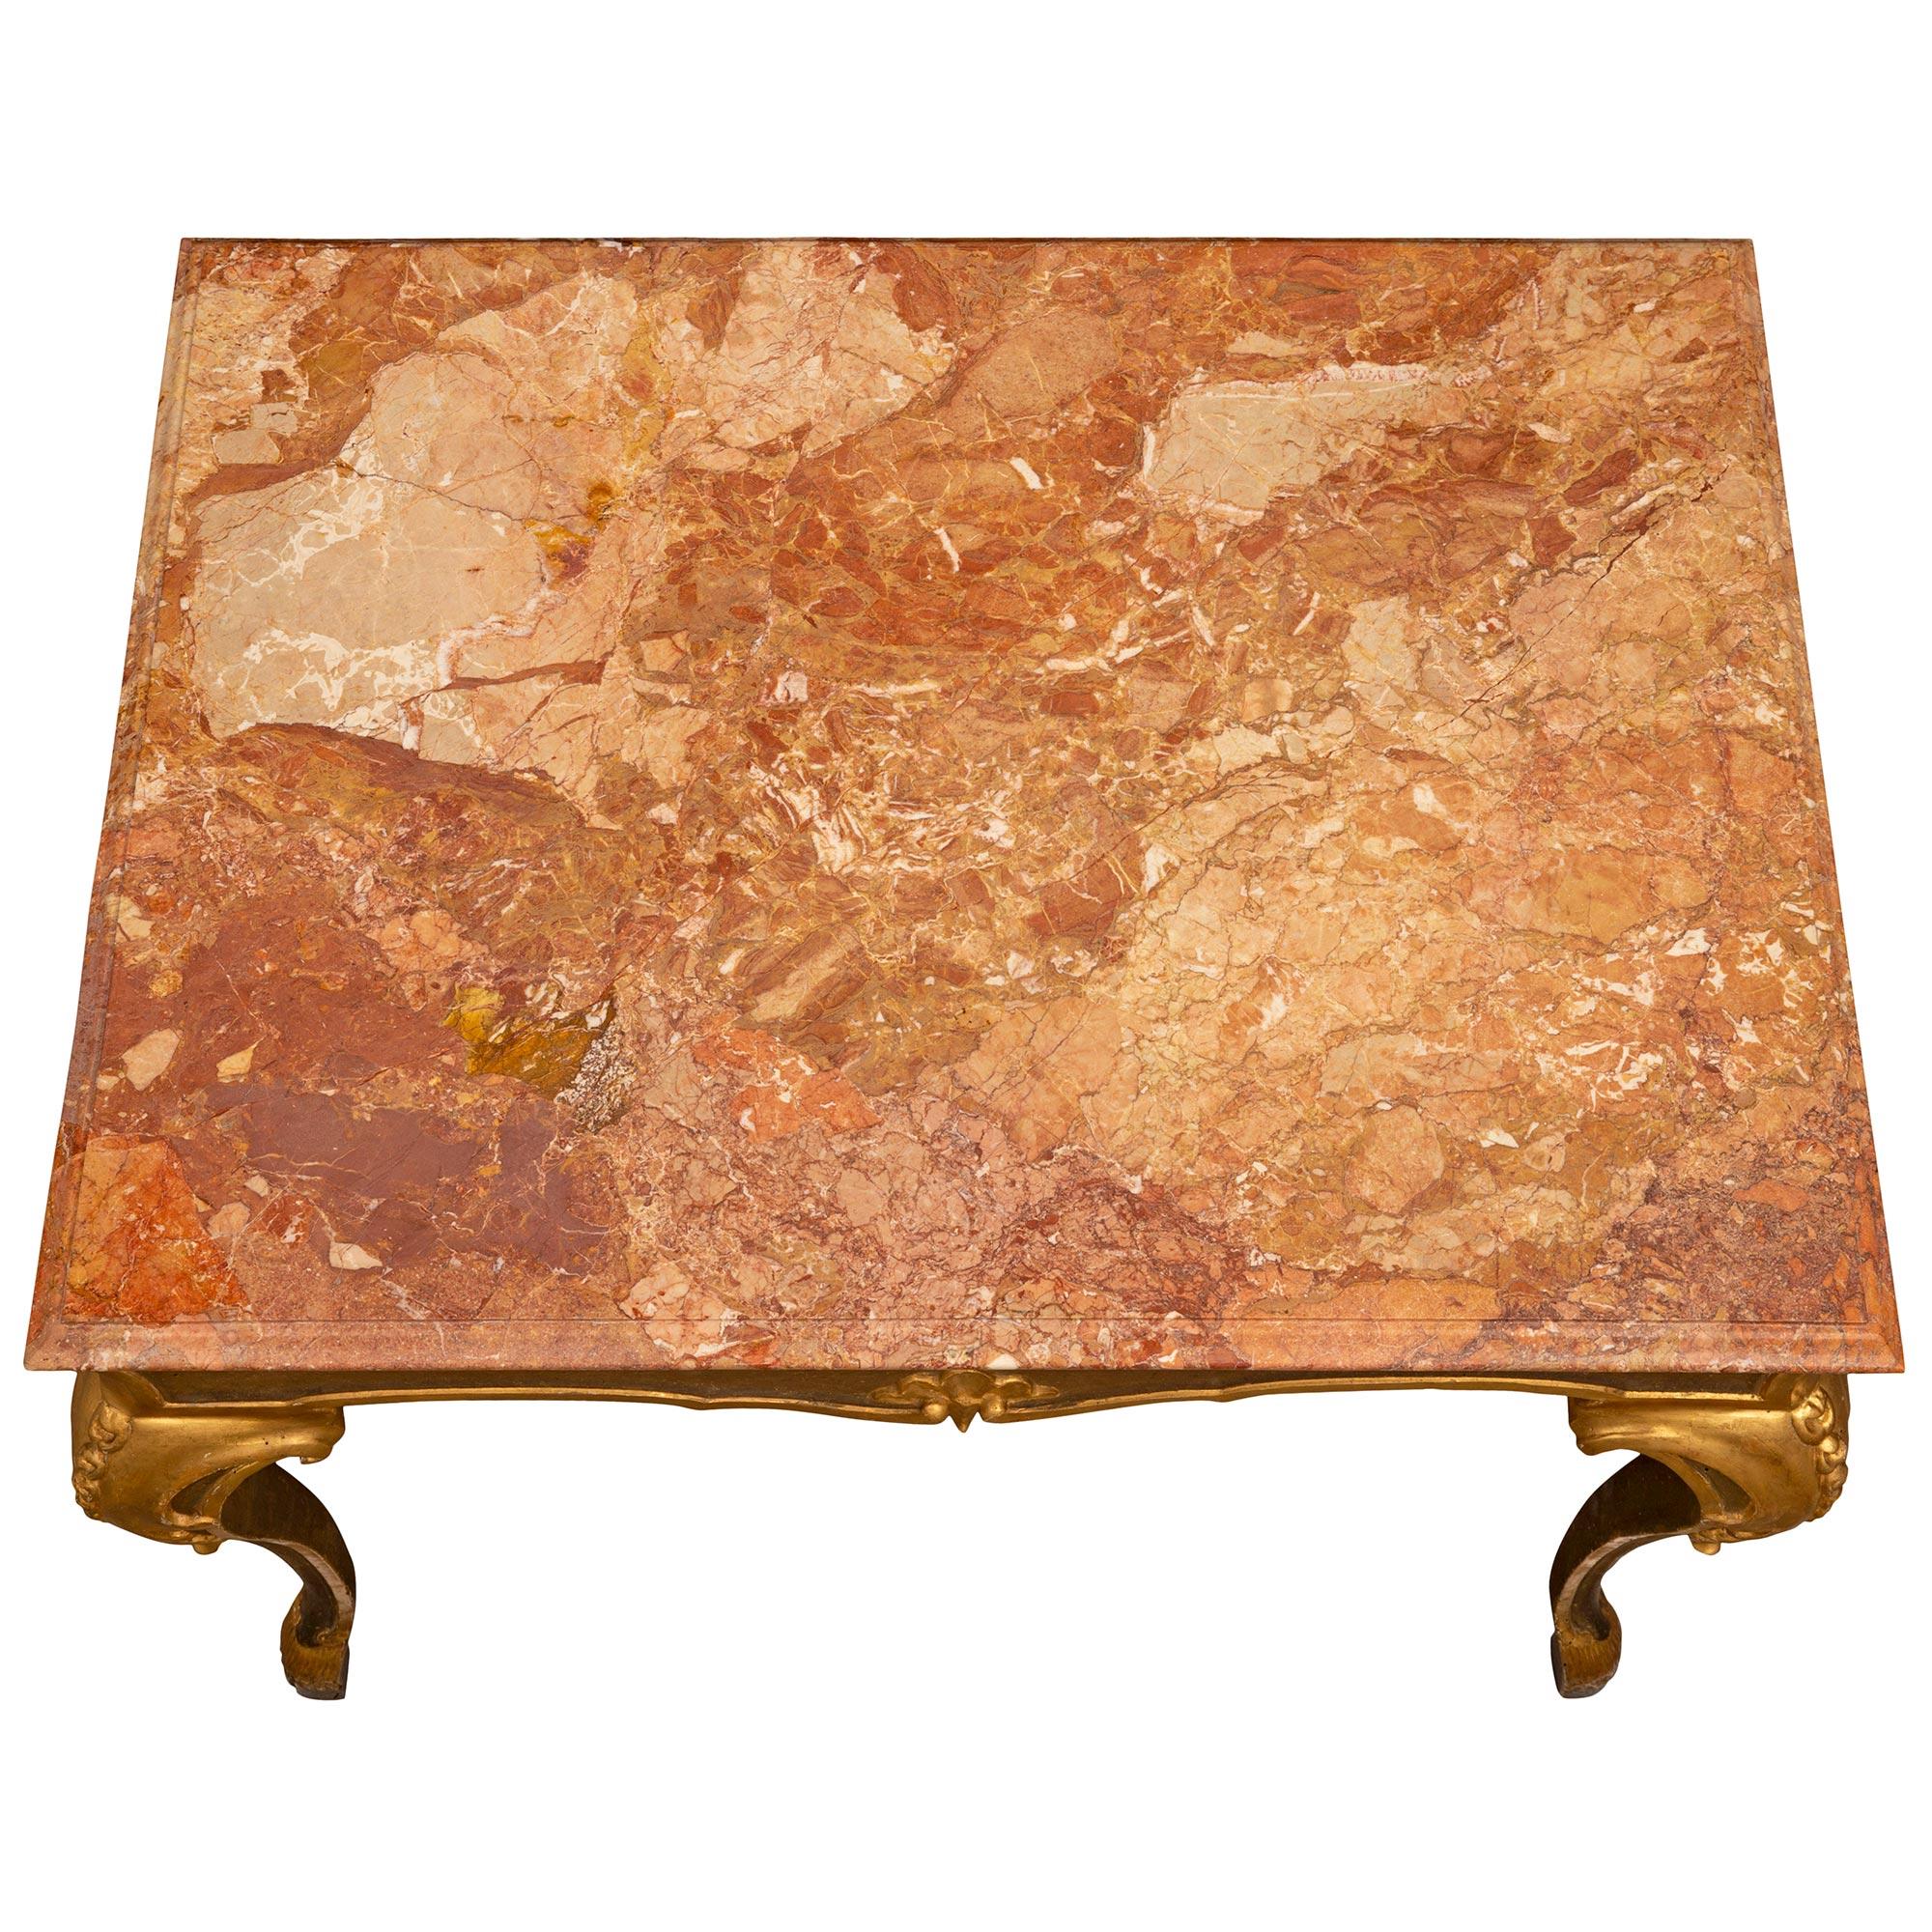 A beautiful Italian 18th century Louis XV period polychrome, giltwood, and Orange Varois marble center table. The rectangular table from Bologna is raised by most elegant polychrome cabriole legs with handsome hoof feet and richly carved giltwood